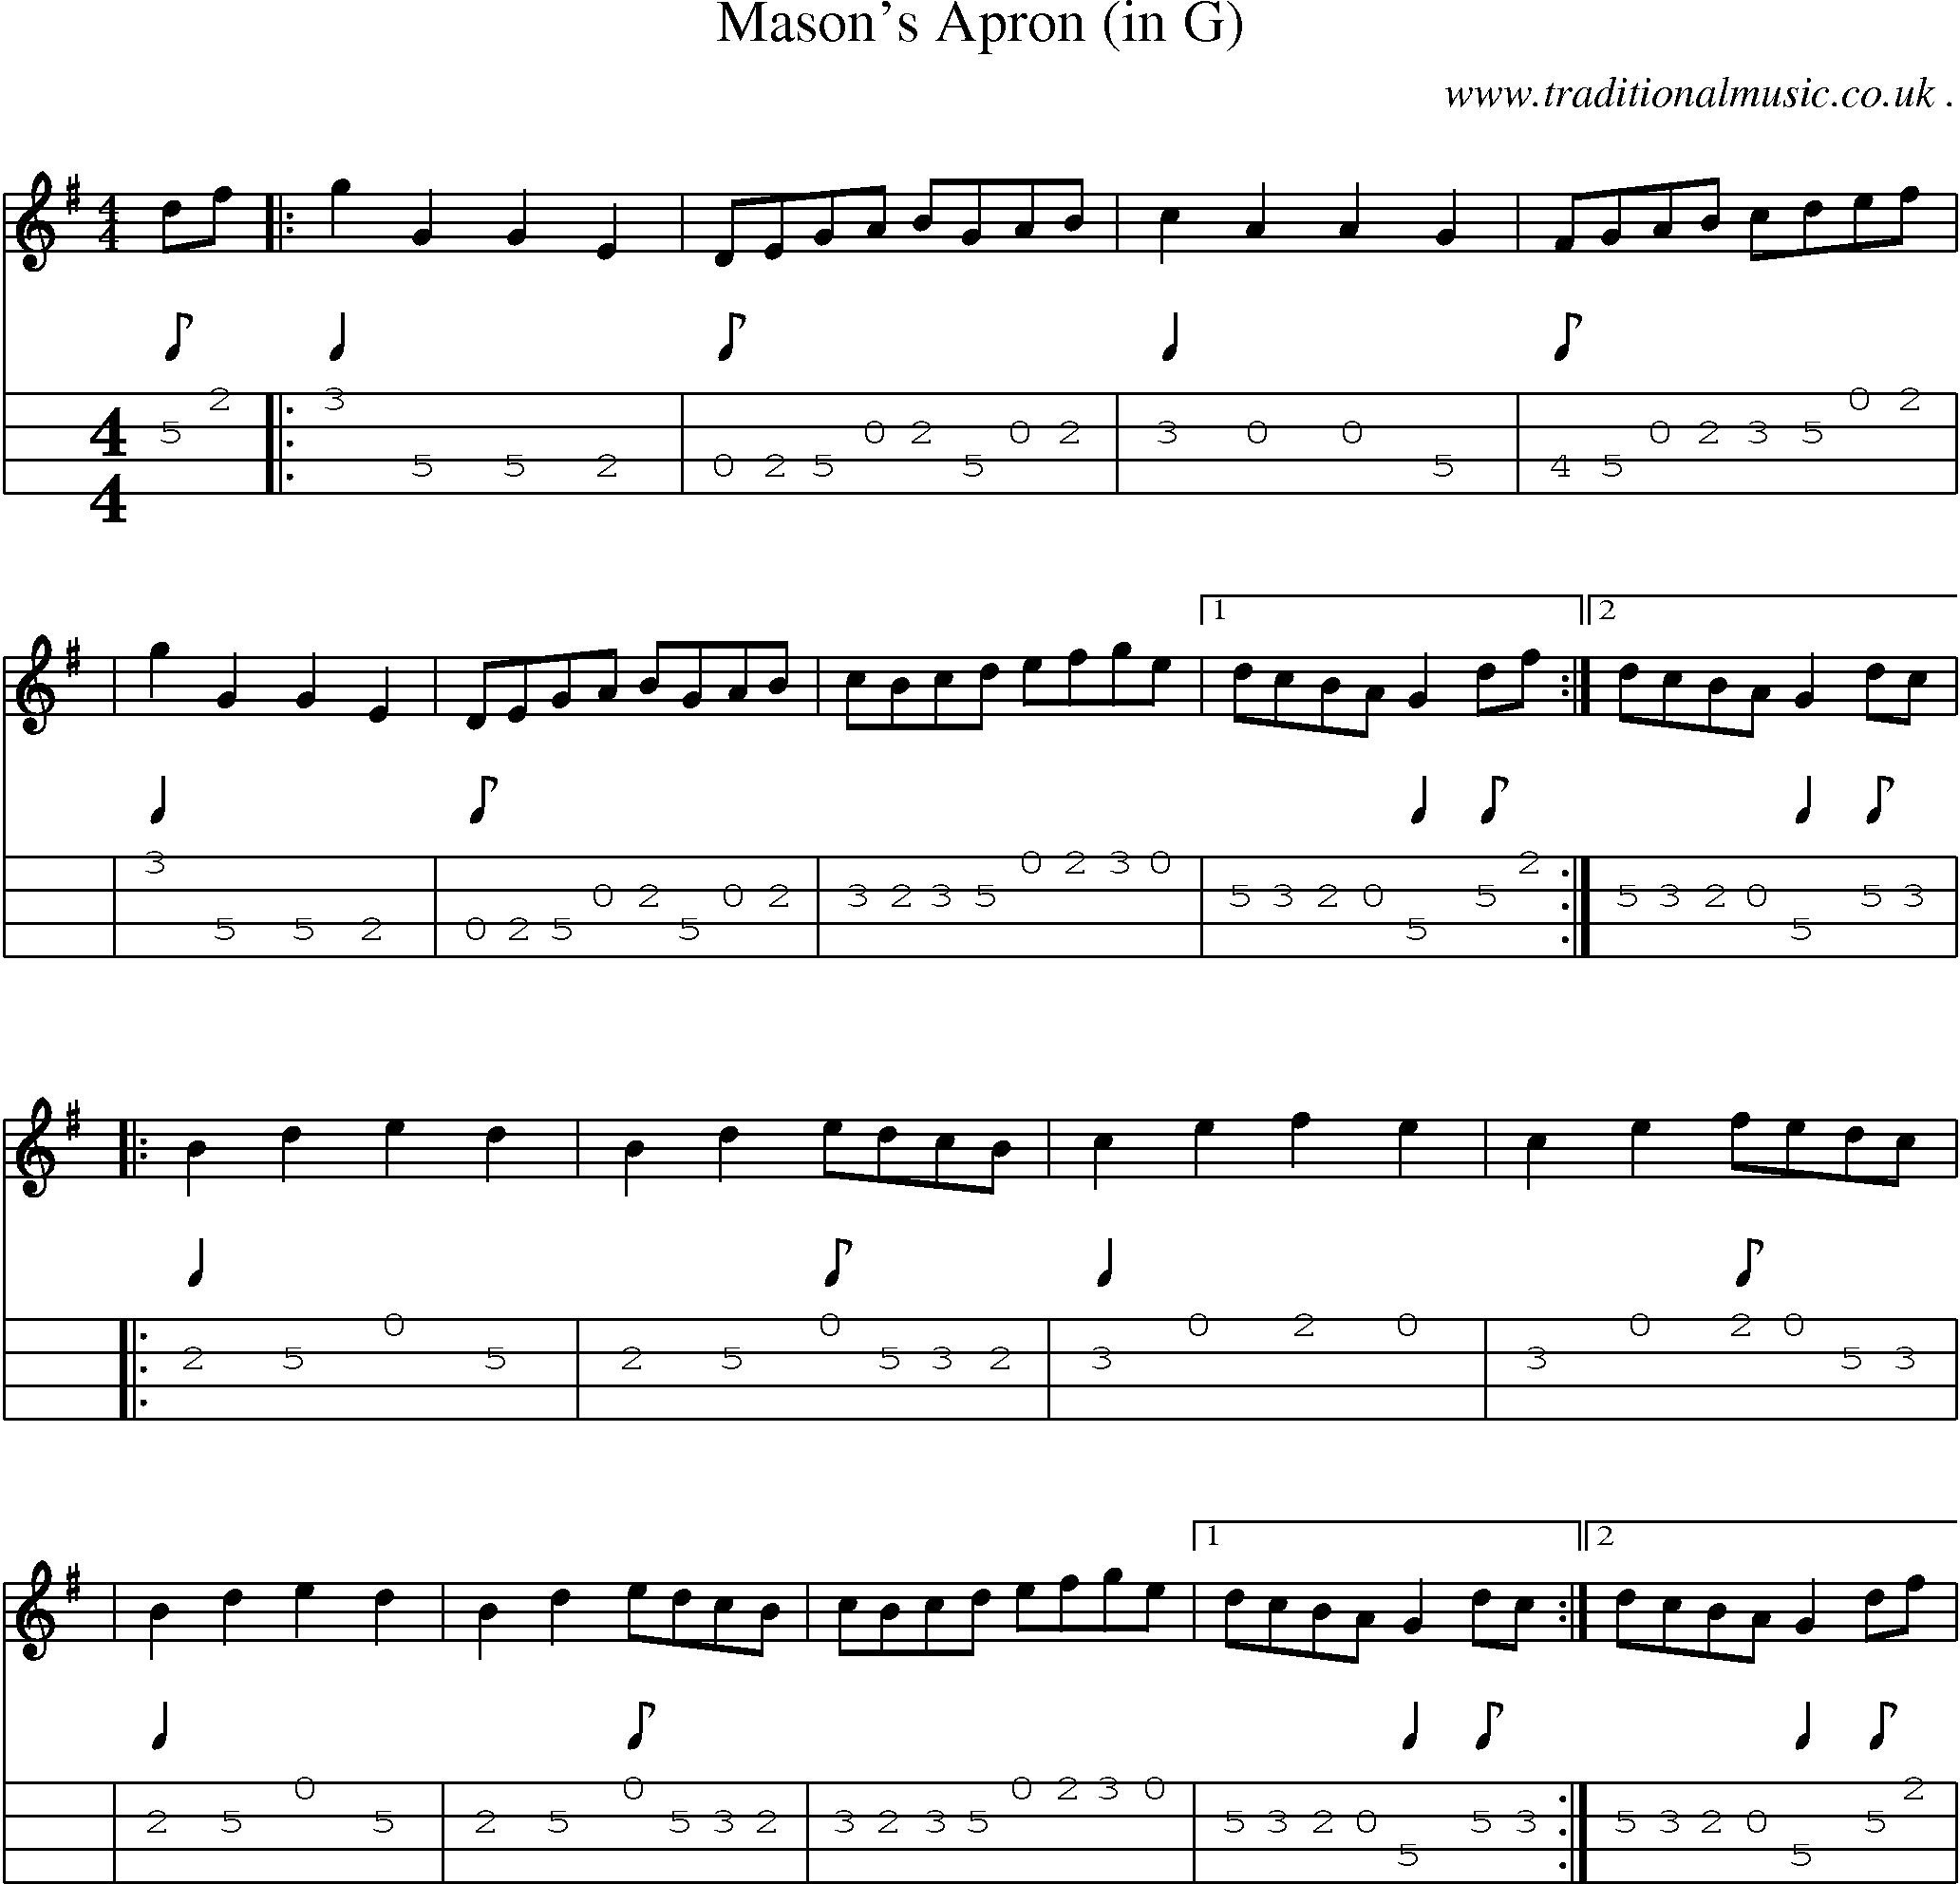 Sheet-Music and Mandolin Tabs for Masons Apron (in G)